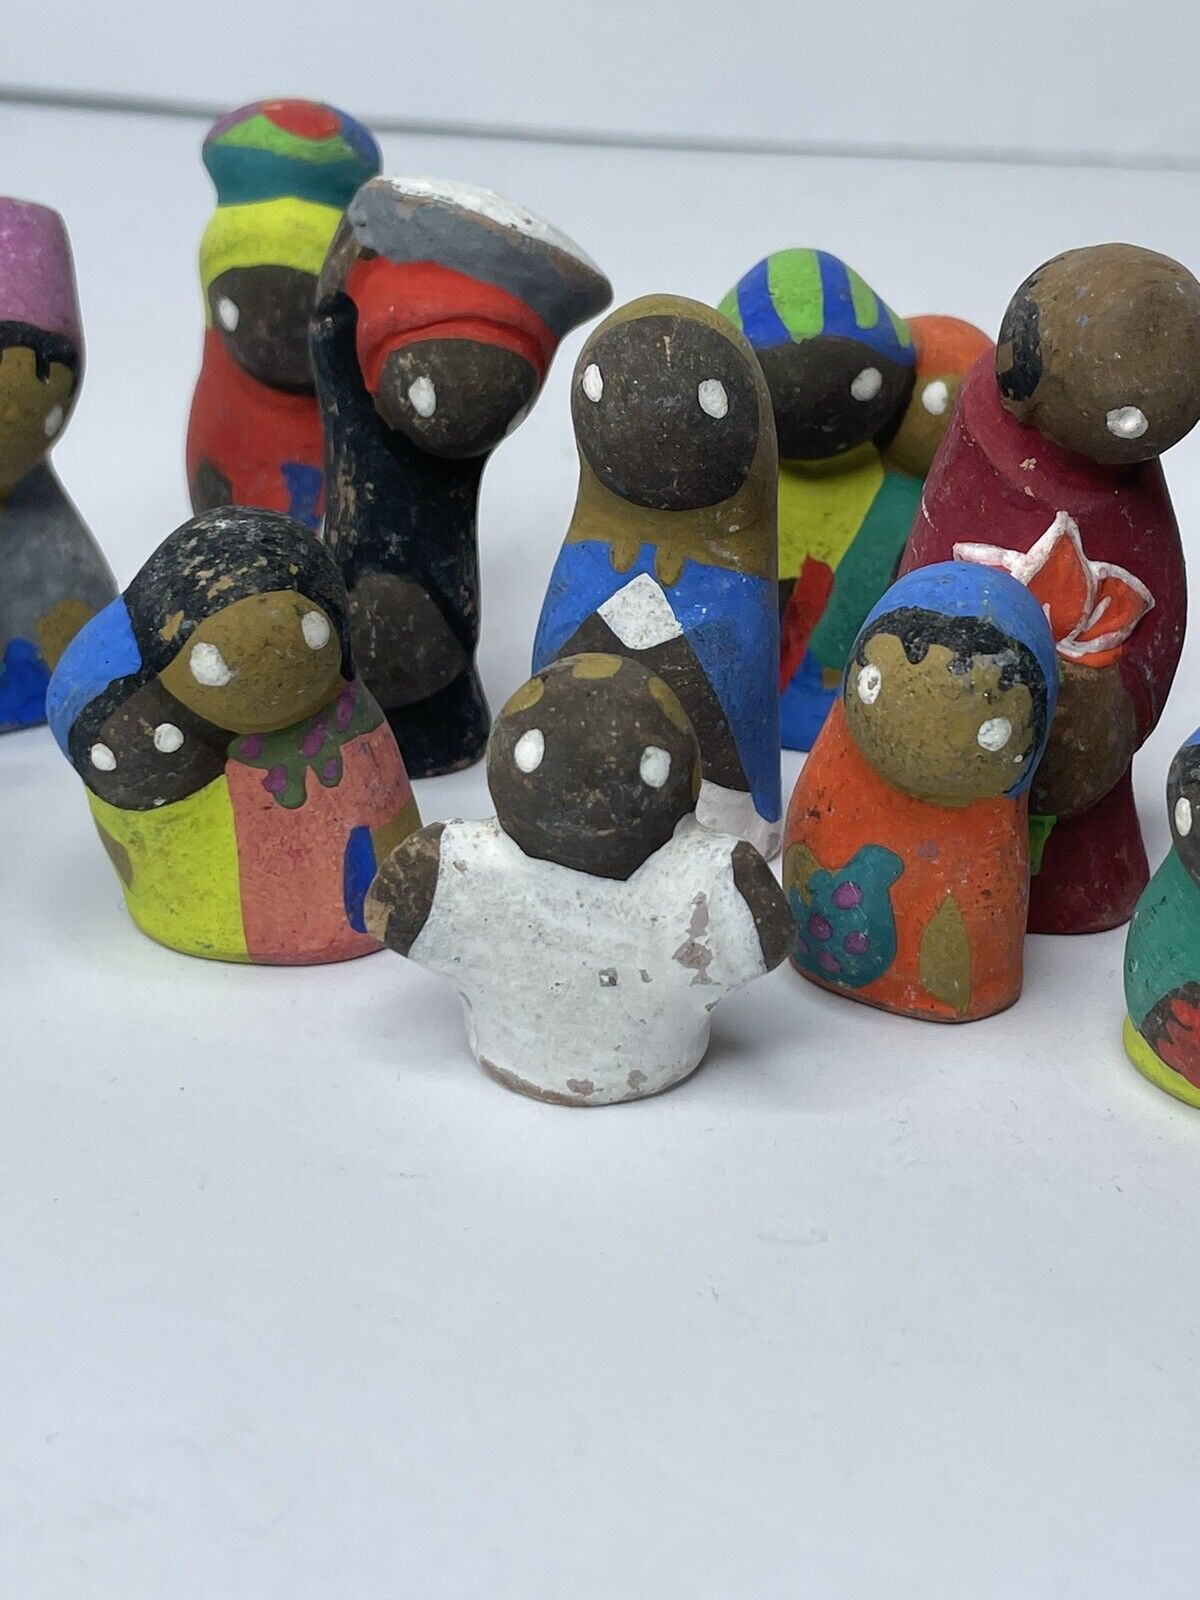 Haitian Clay People, Nativity + Hand Molded, Hand Painted, 13 Pcs Small Figures